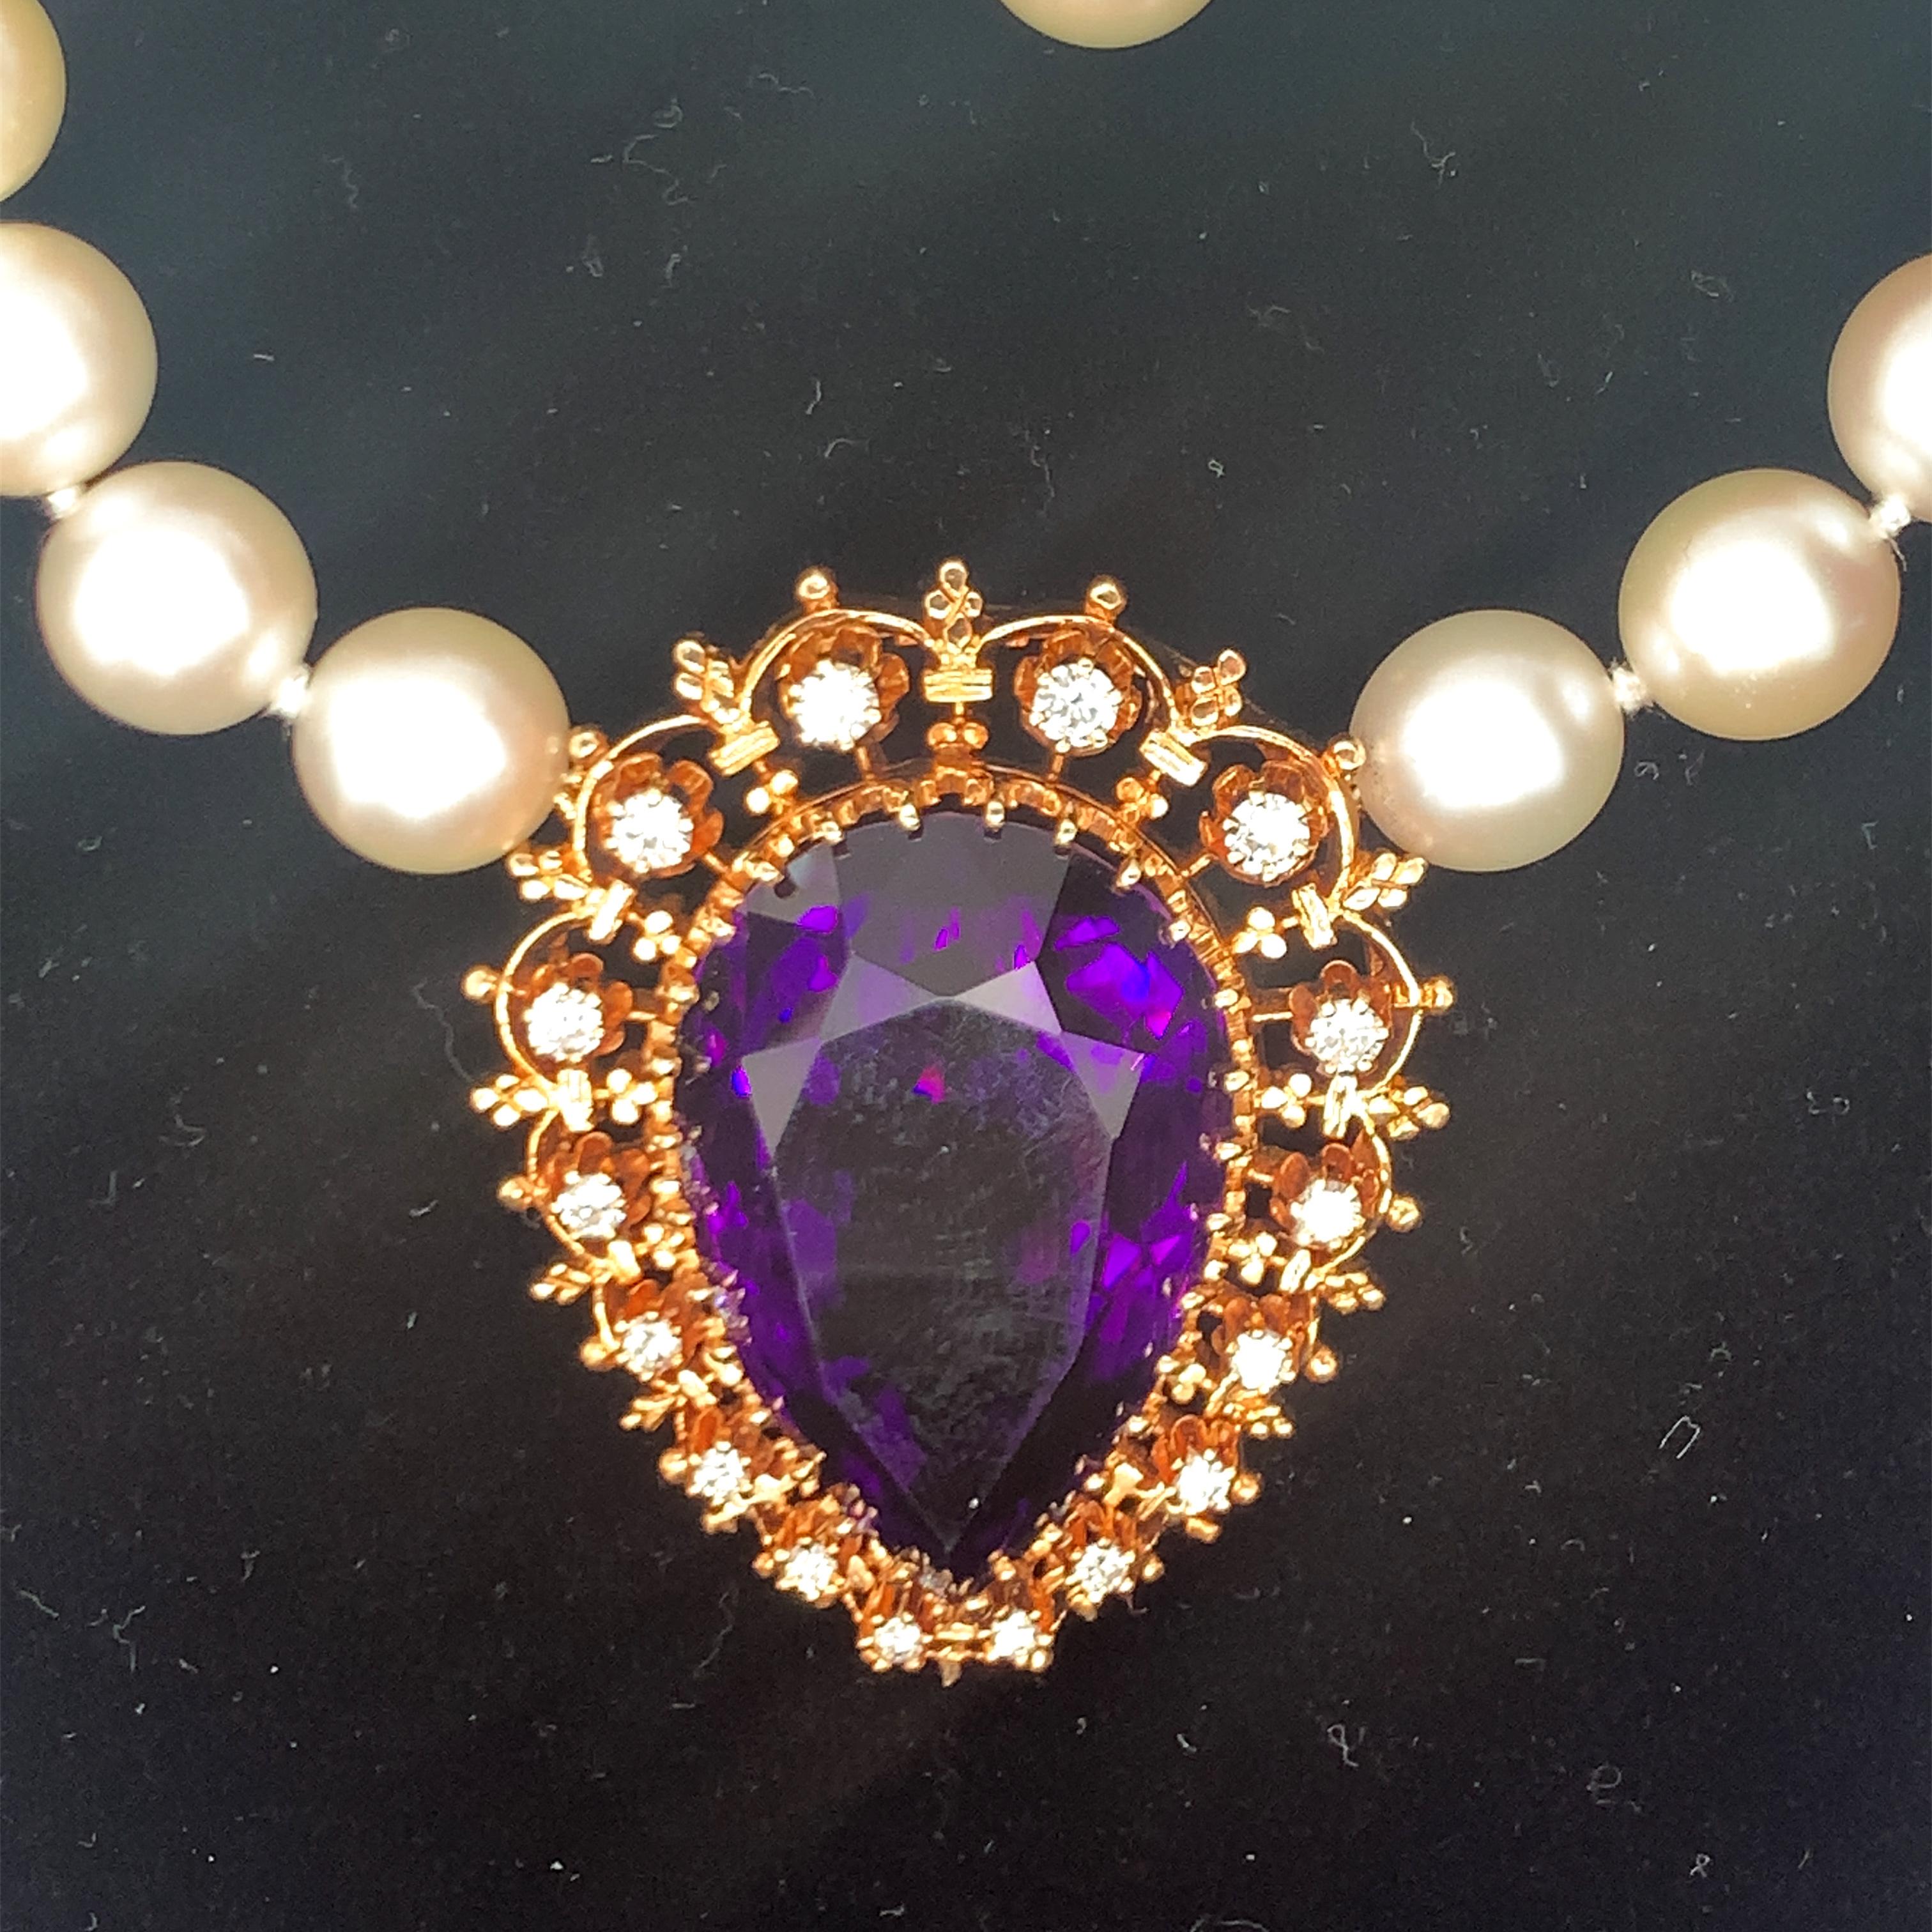 One amethyst and diamond Victorian pendant charm centering one pear shape amethyst weighing 50 ct. with sixteen round brilliant cut diamond weighing a total of 1 ct. with G color and VS-1 clarity. Attached to a modern pearl necklace featuring